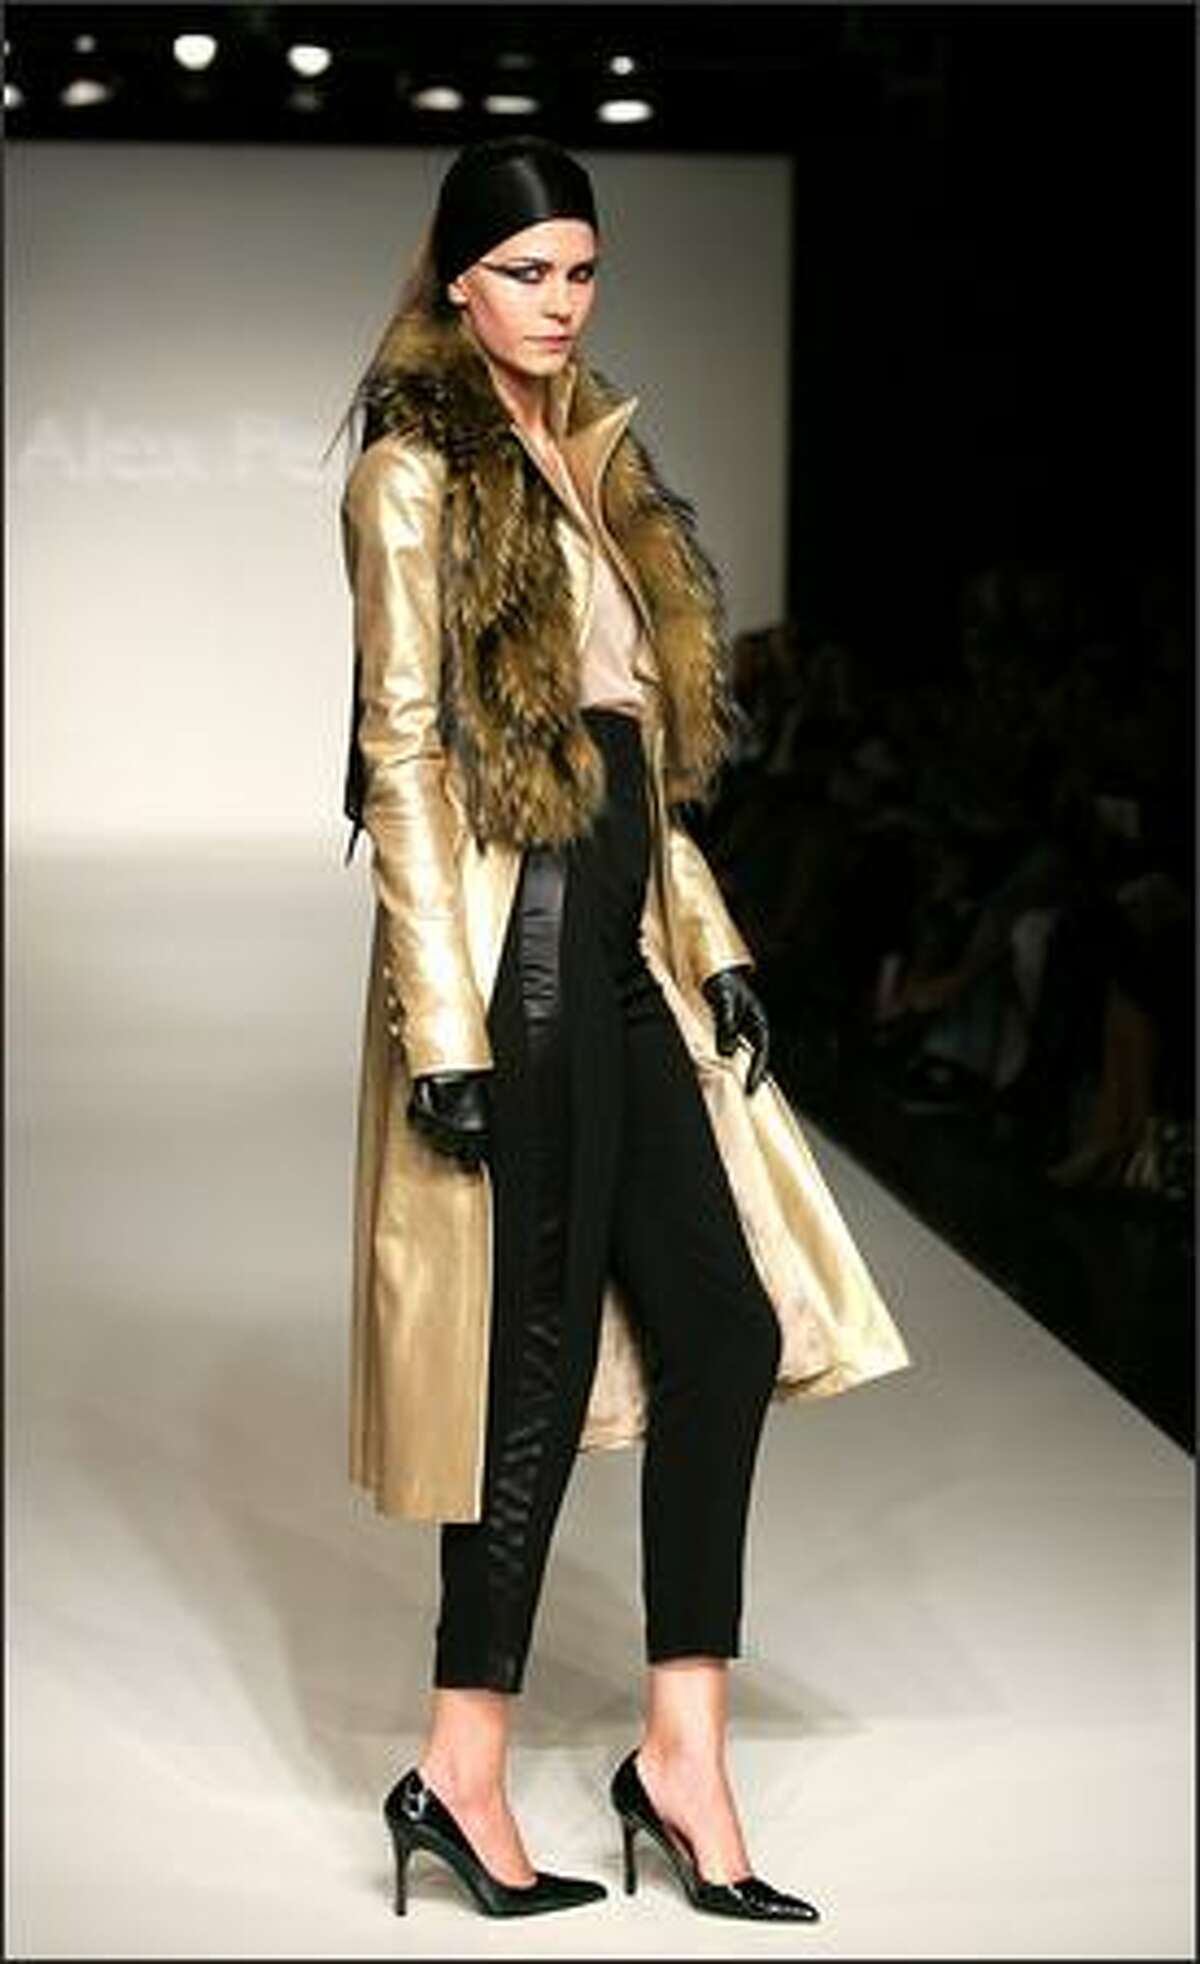 A model showcases designs on the catwalk by Alex Perry on the first day of Rosemount Australian Fashion Week's Transeasonal 2008 Collections, at the Overseas Passenger Terminal on October 9, 2007 in Sydney, Australia.